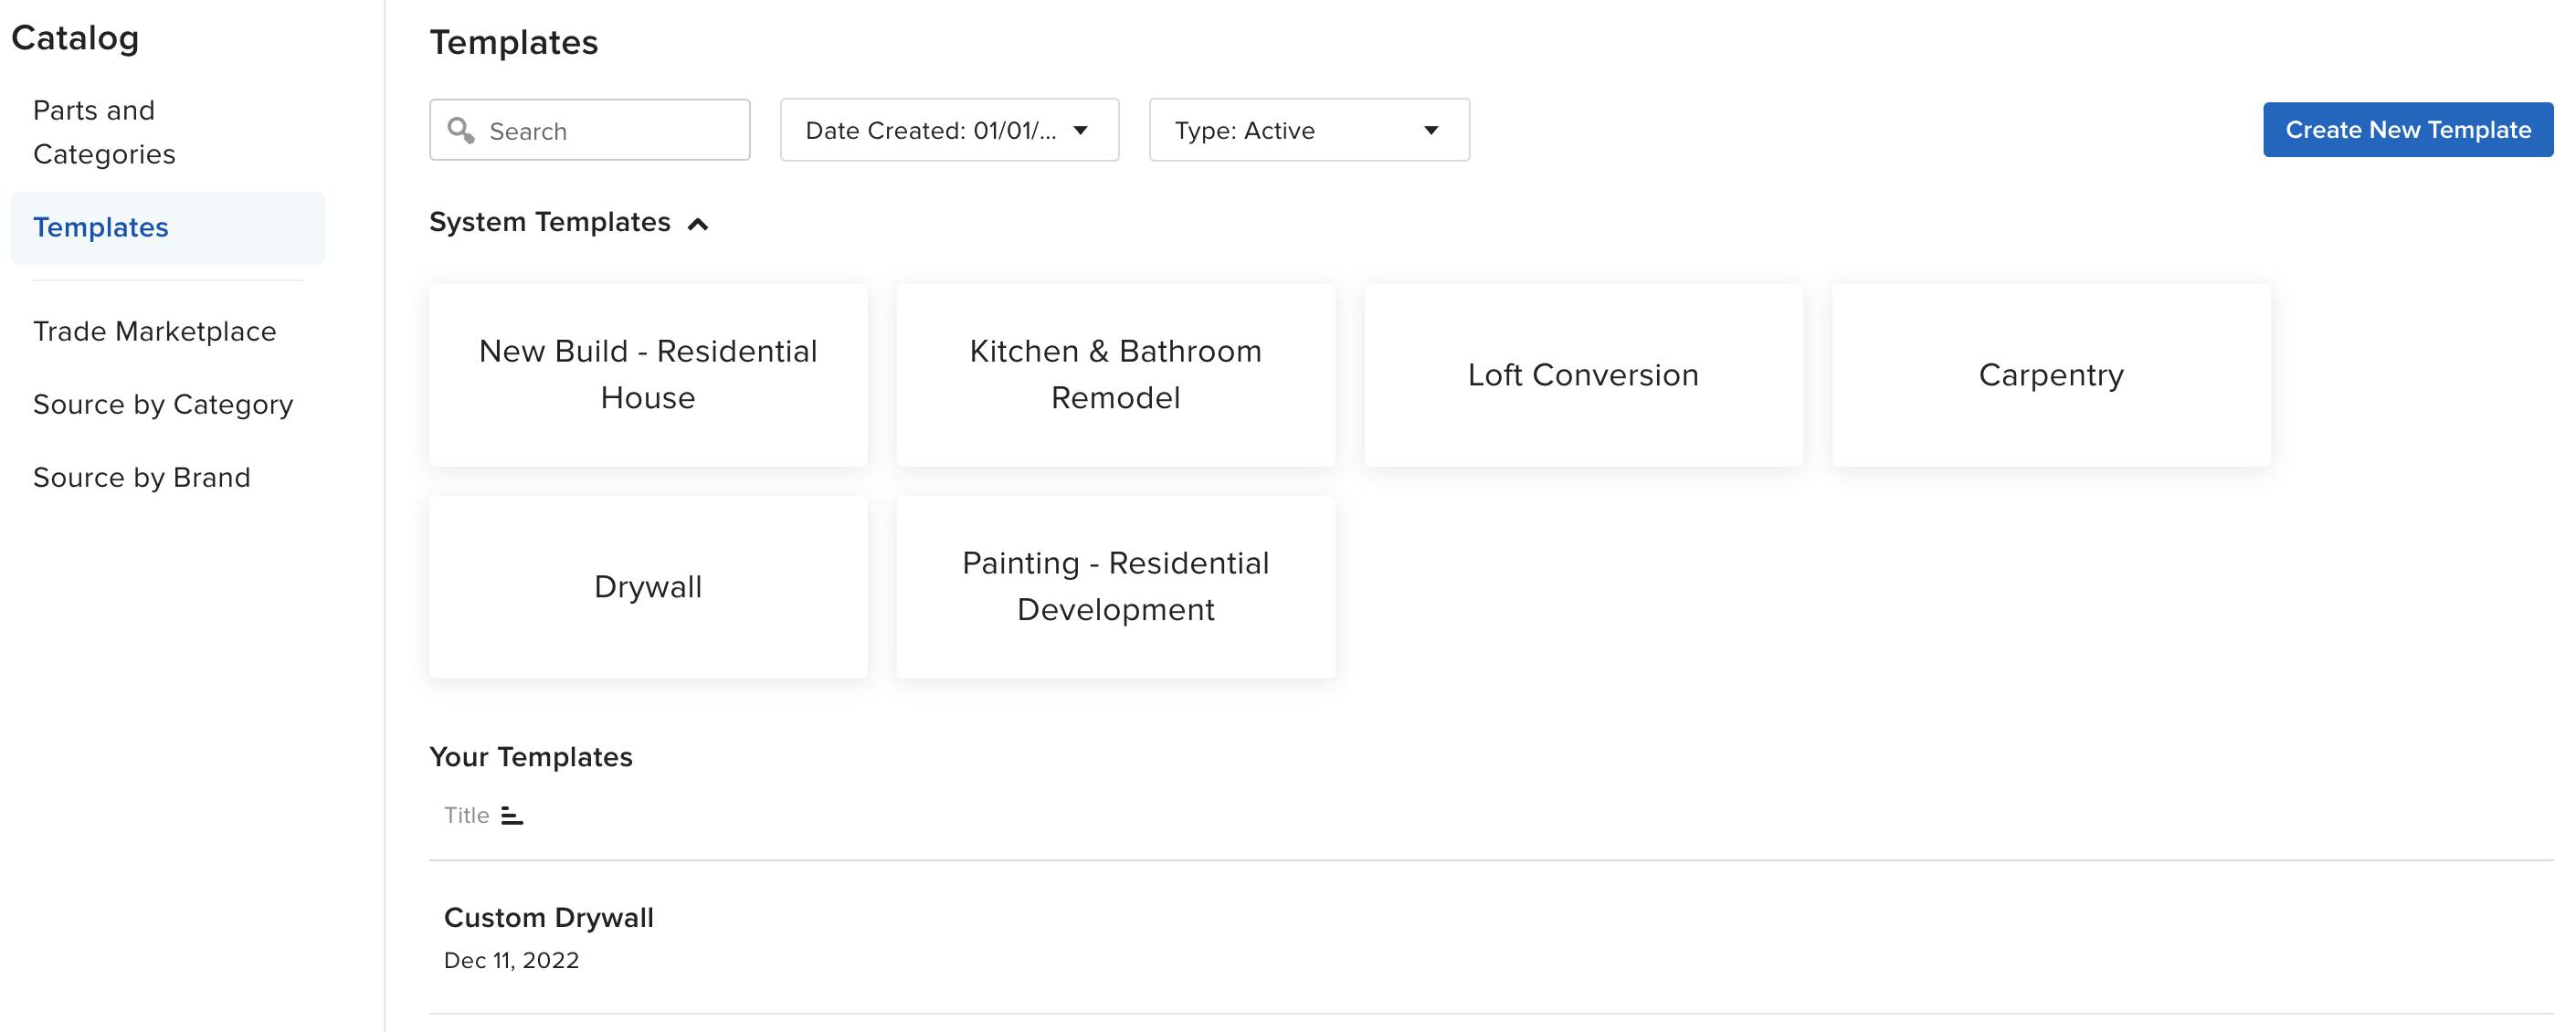 How To Create Estimates And Invoices From Templates Houzz 9330